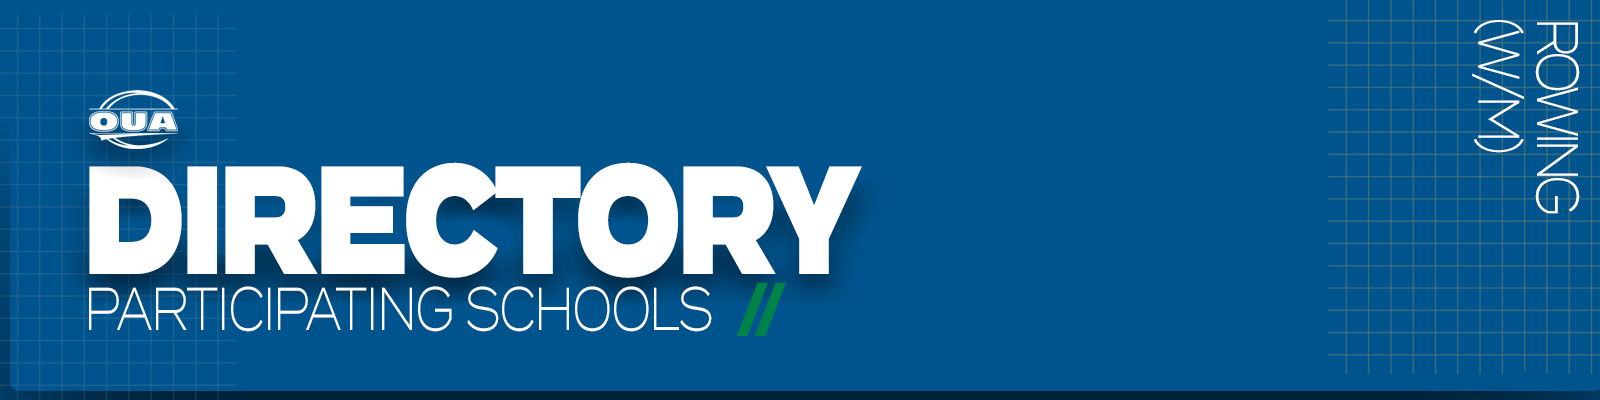 Predominantly blue graphic with large white text on the left side that reads 'Directory, Participating Schools' and small white vertical text on the right side that reads 'Rowing'